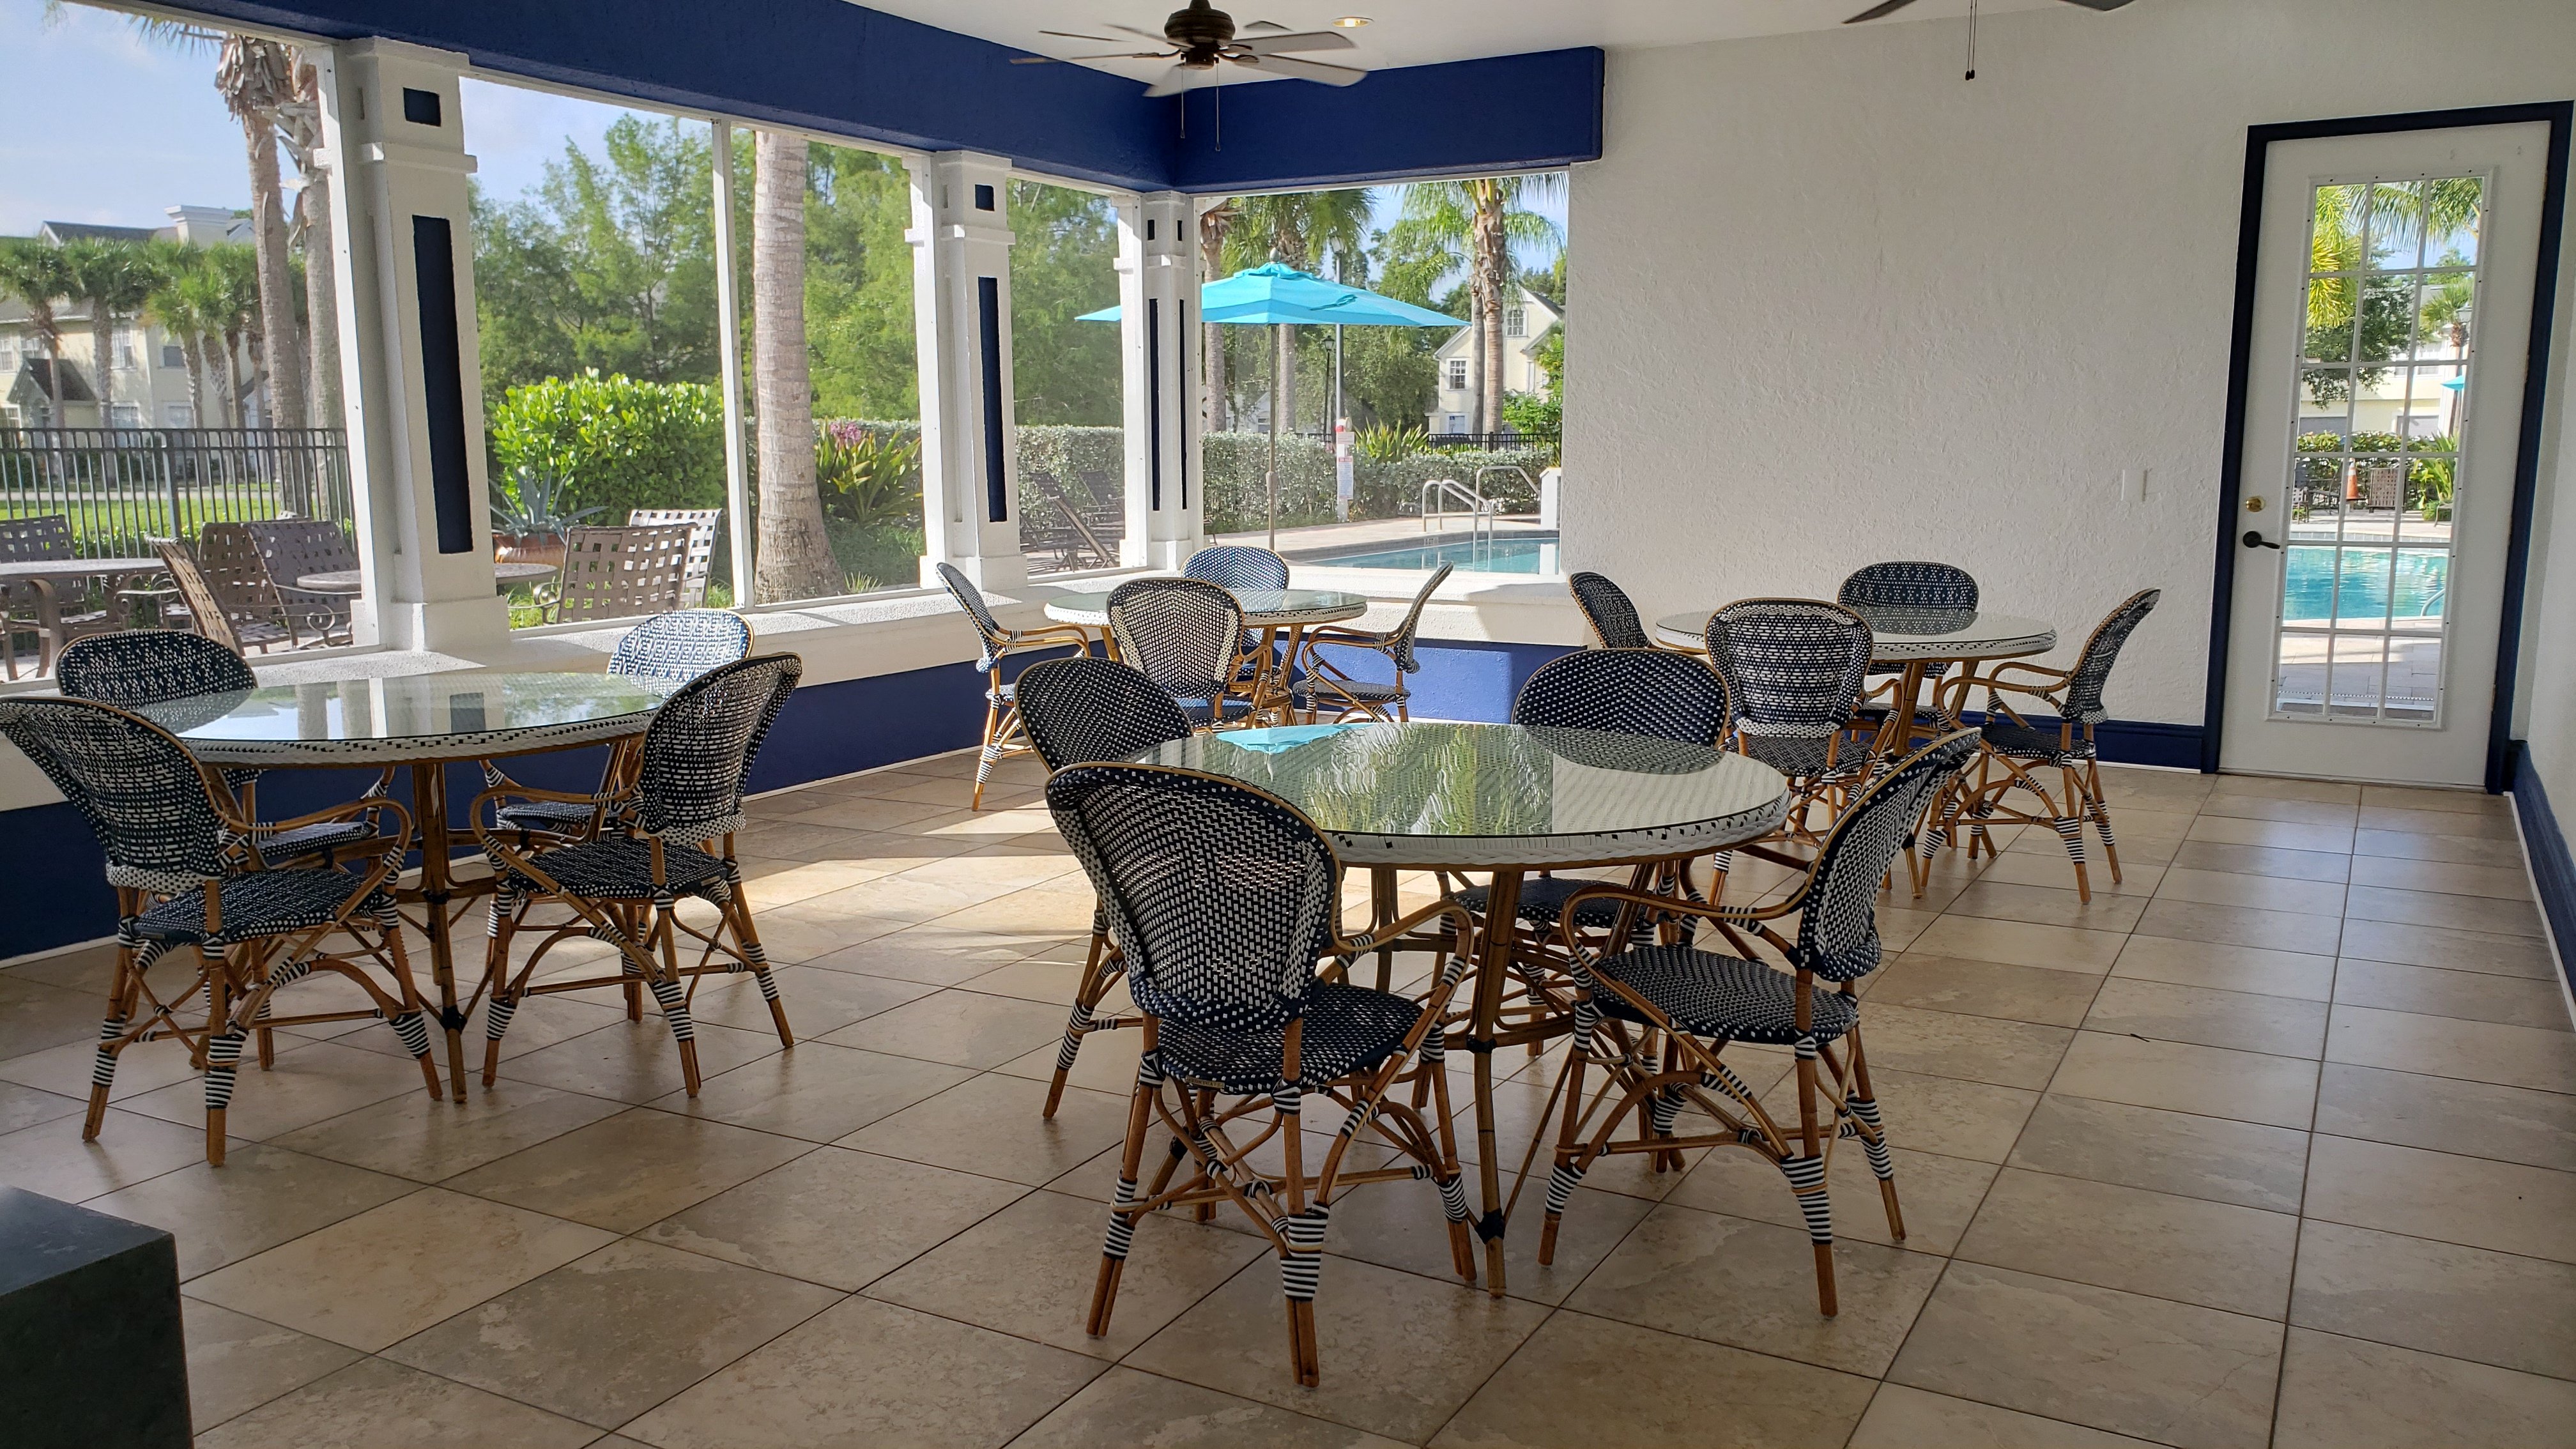 a dining area with tables and chairs and a pool in the background